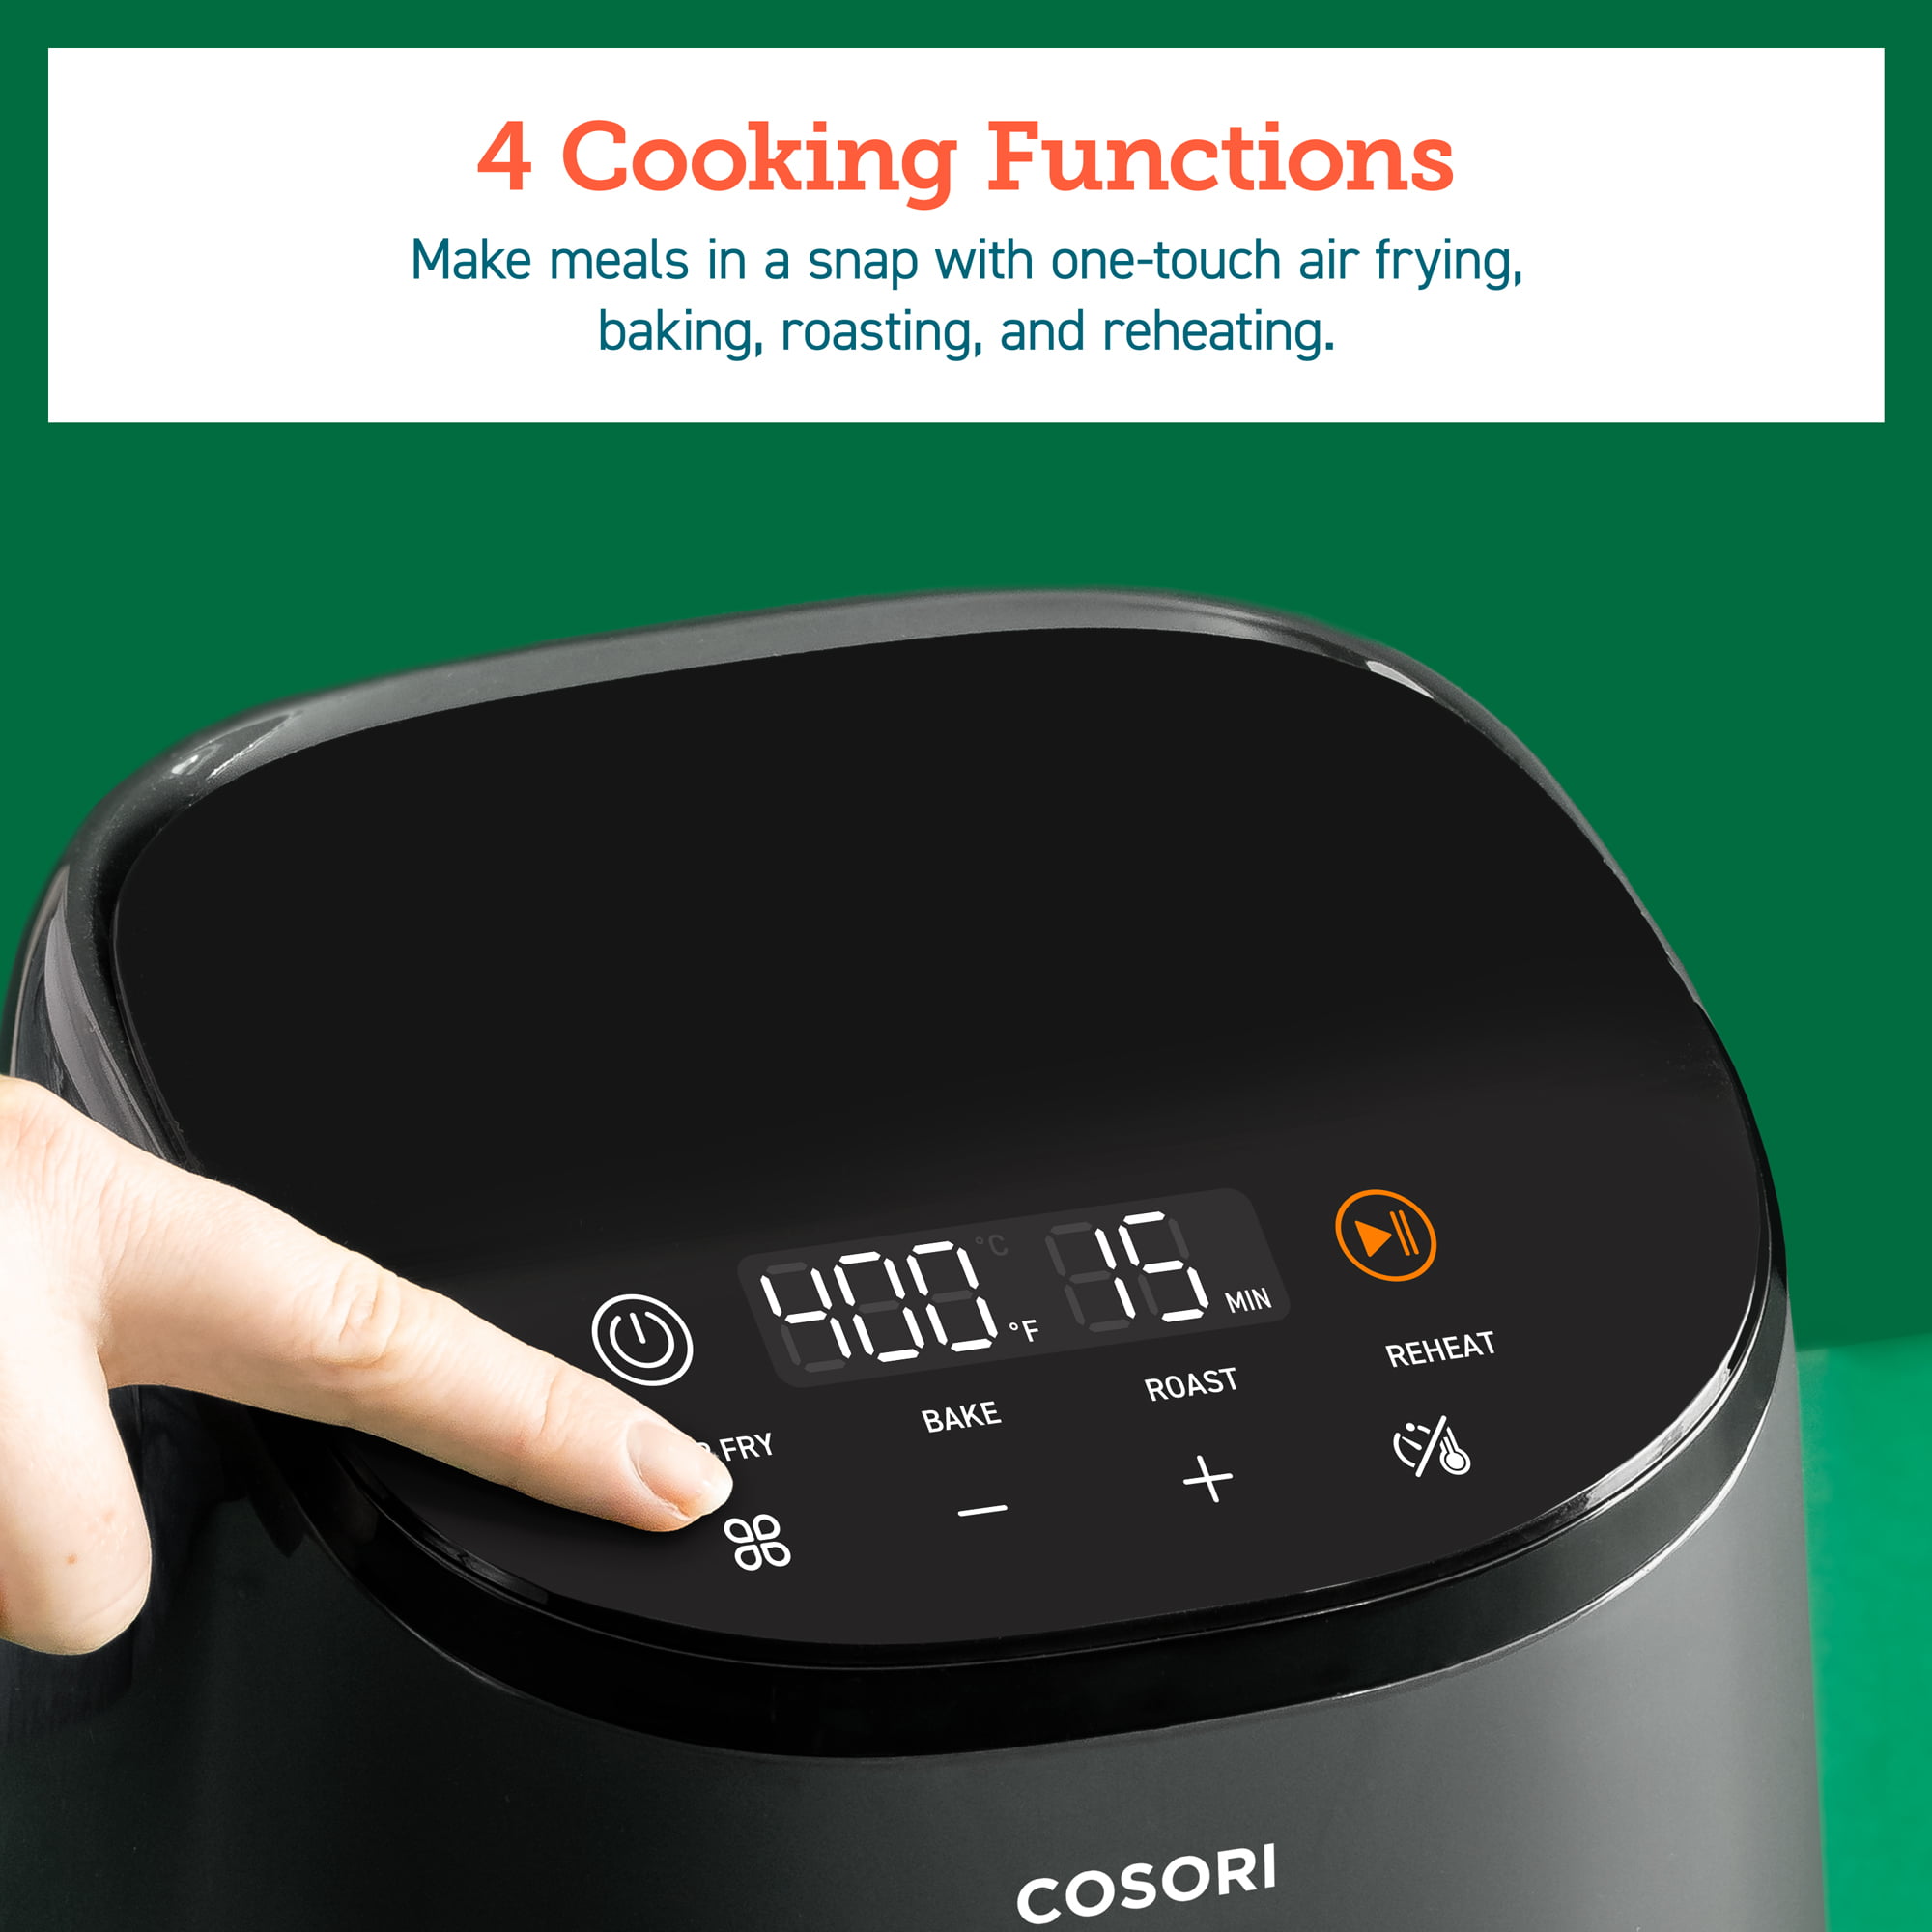 Introducing the all-new COSORI Lite 2.1-Quart Mini Air Fryer. With